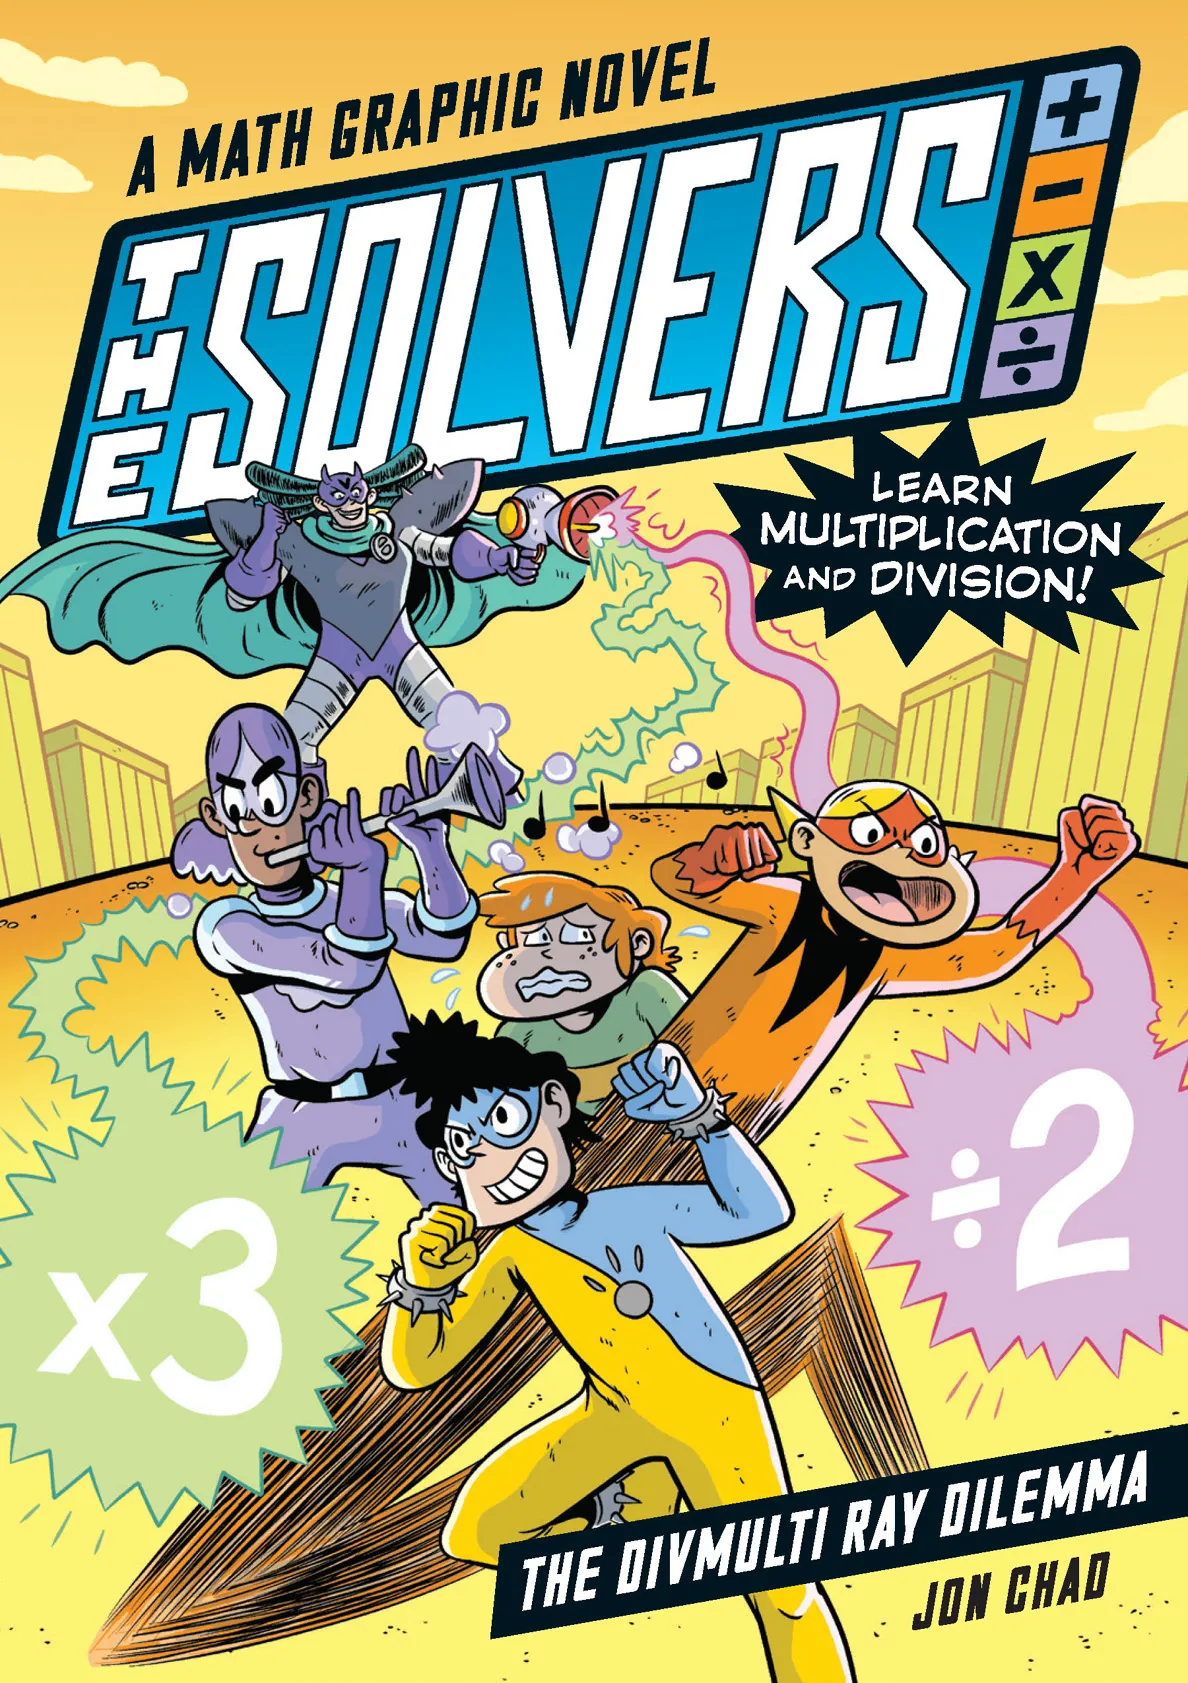 The Divmulti Ray Dilemma: A Math Graphic Novel: Learn Multiplication and Division! (The Solvers #1)